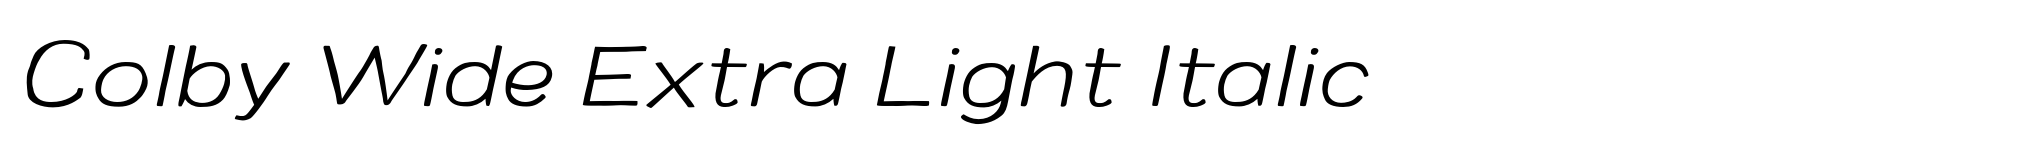 Colby Wide Extra Light Italic image